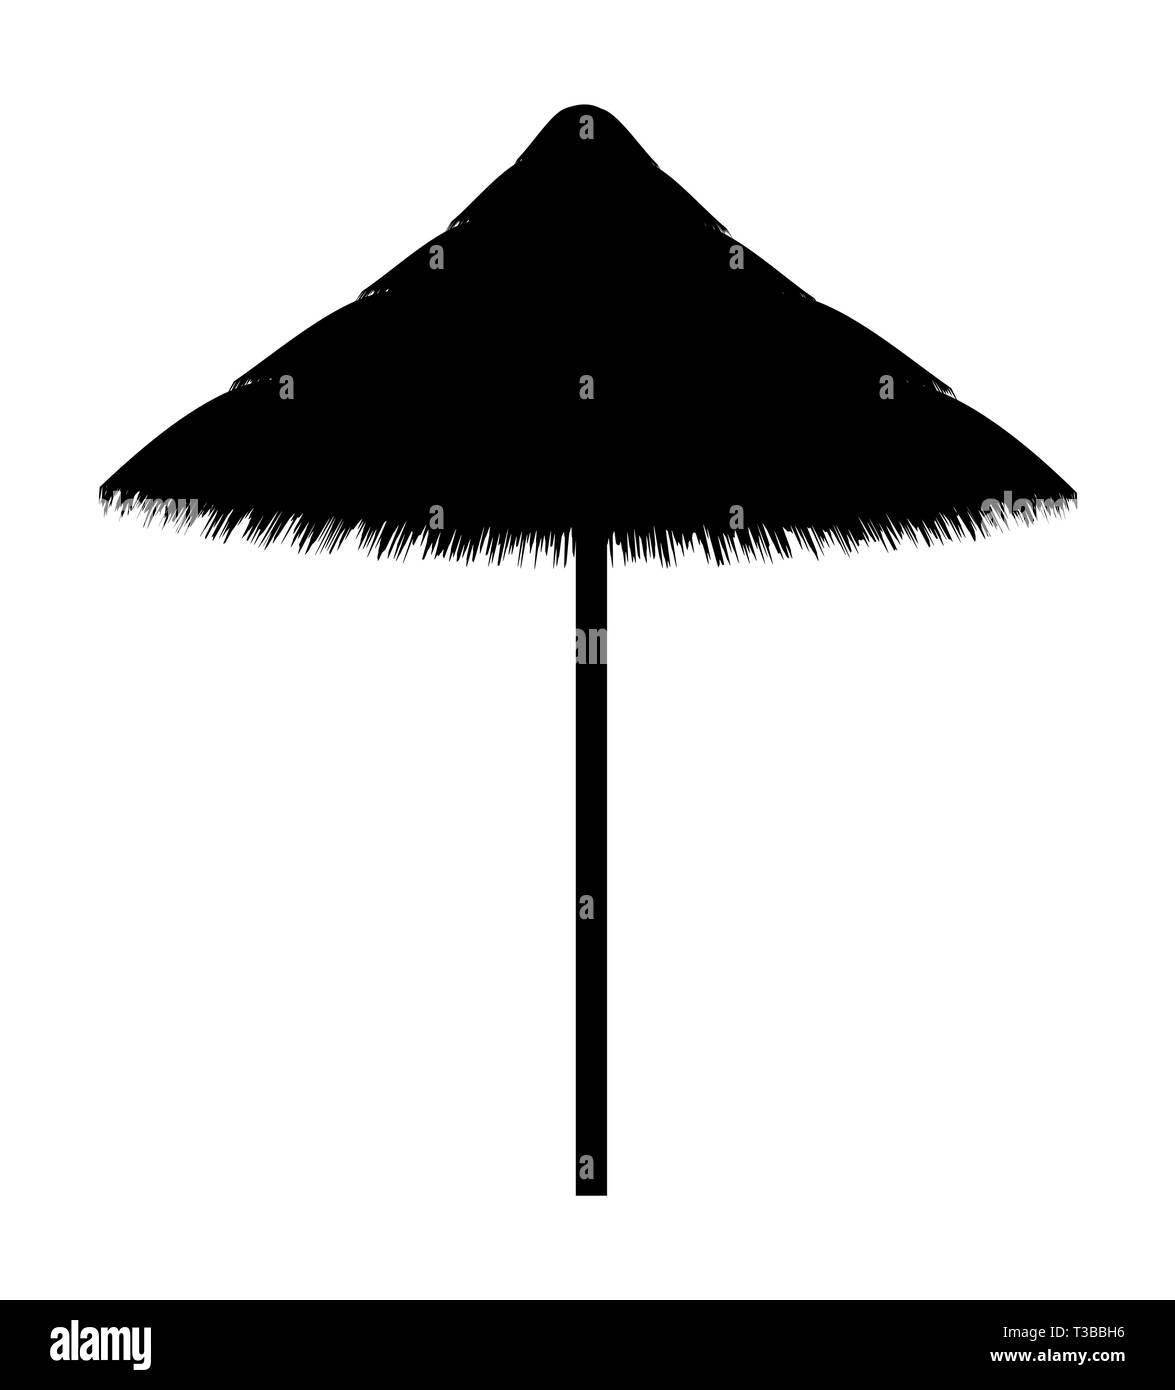 beach umbrella made for shade black contour silhouette vector illustration isolated on white background Stock Vector